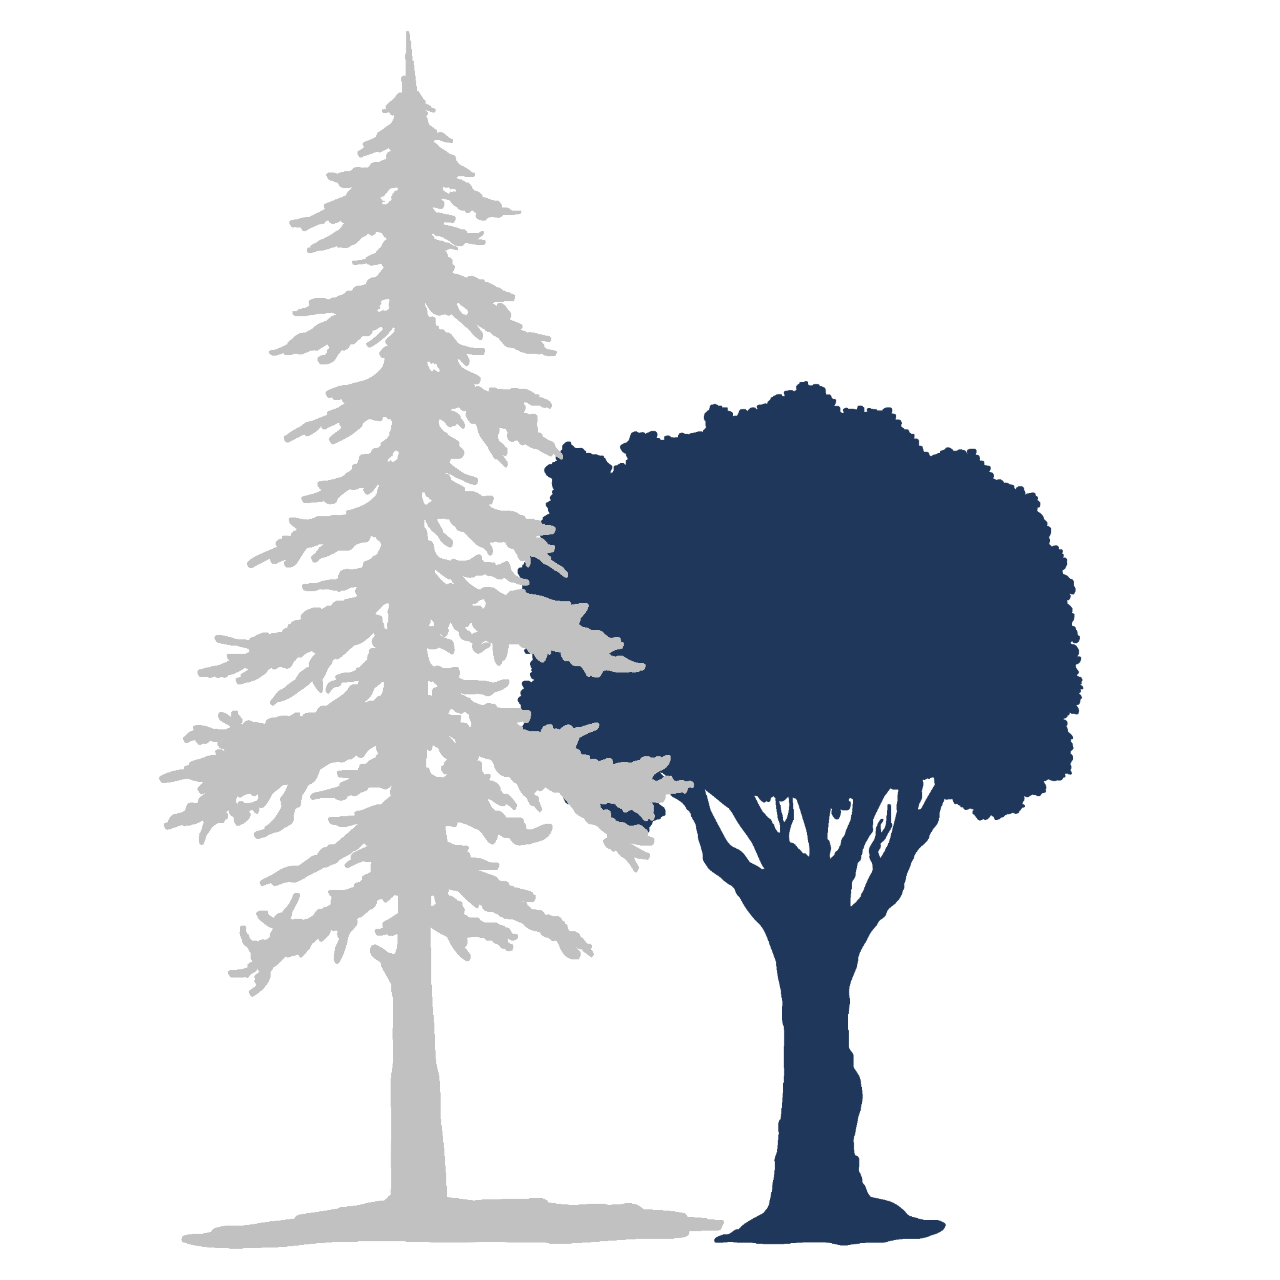 Silhouette of oak and pine tree